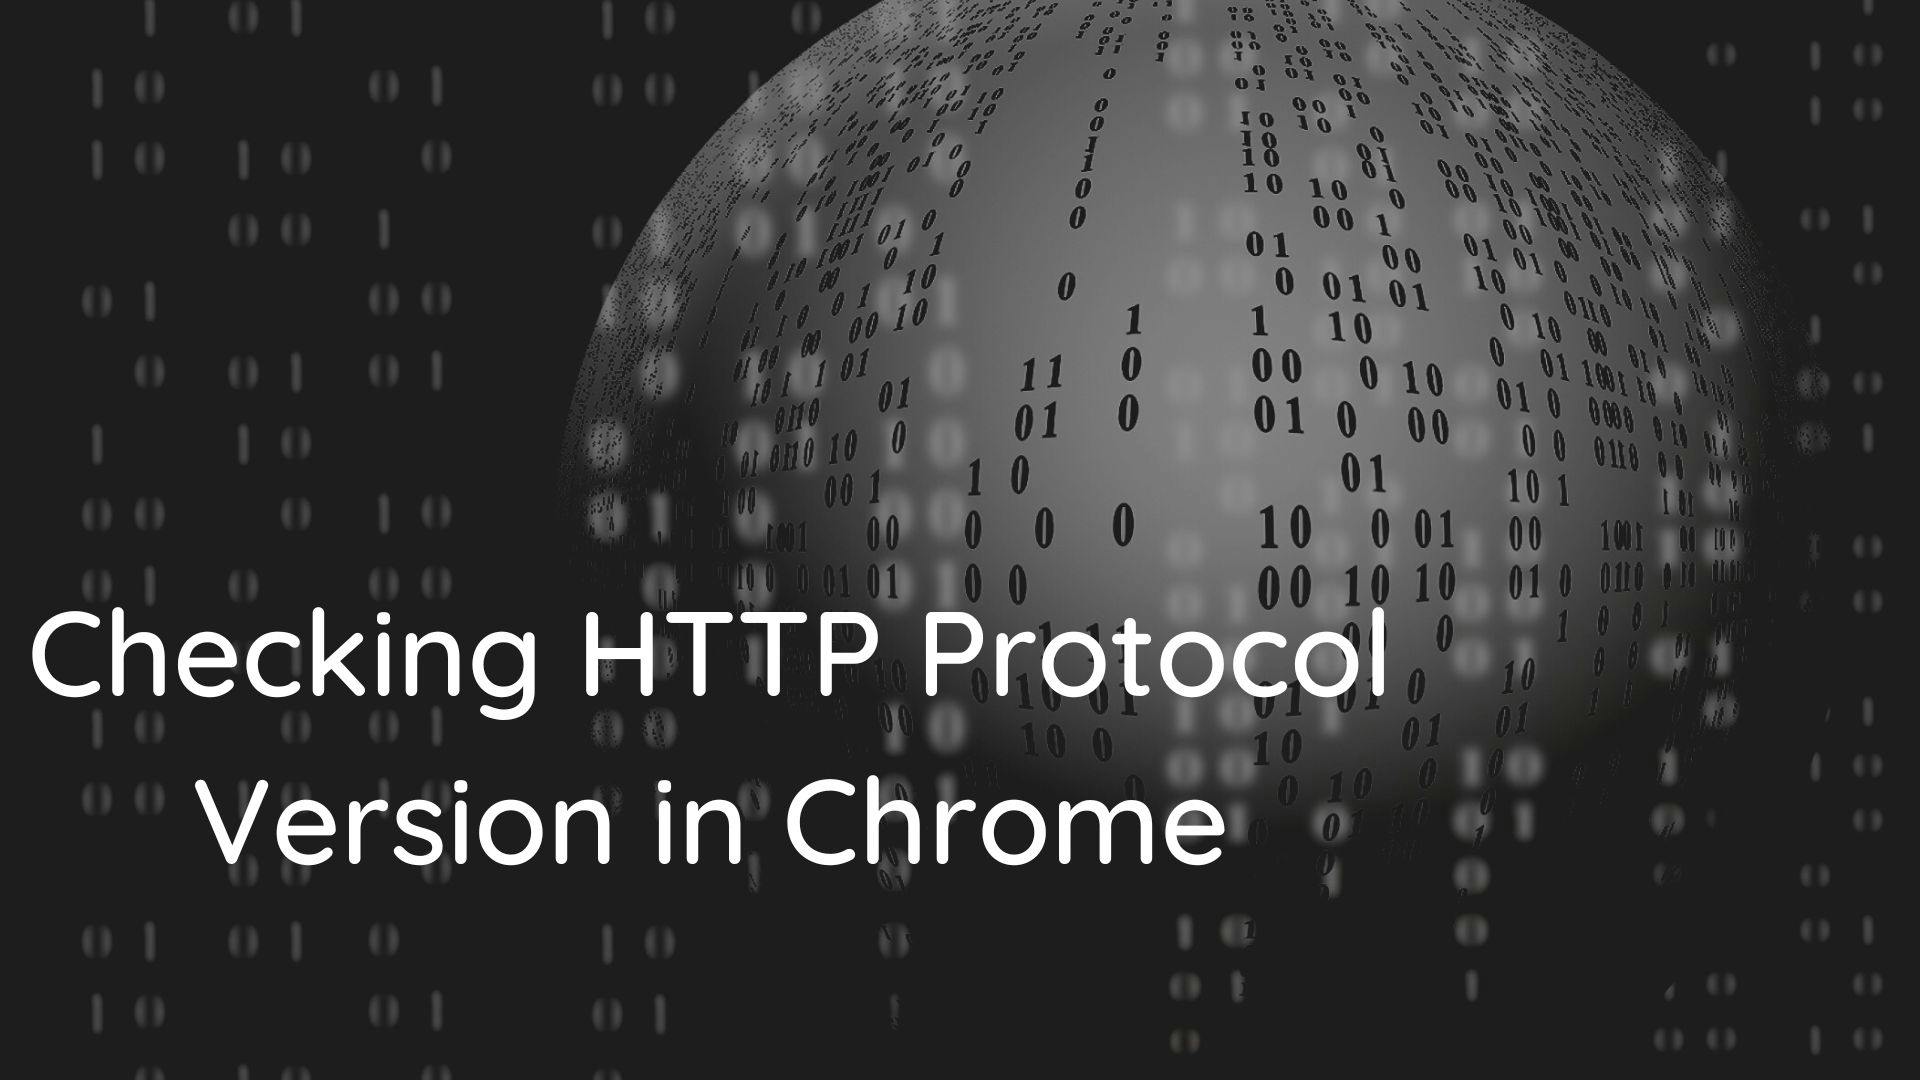 How to check http protocol version in chrome?